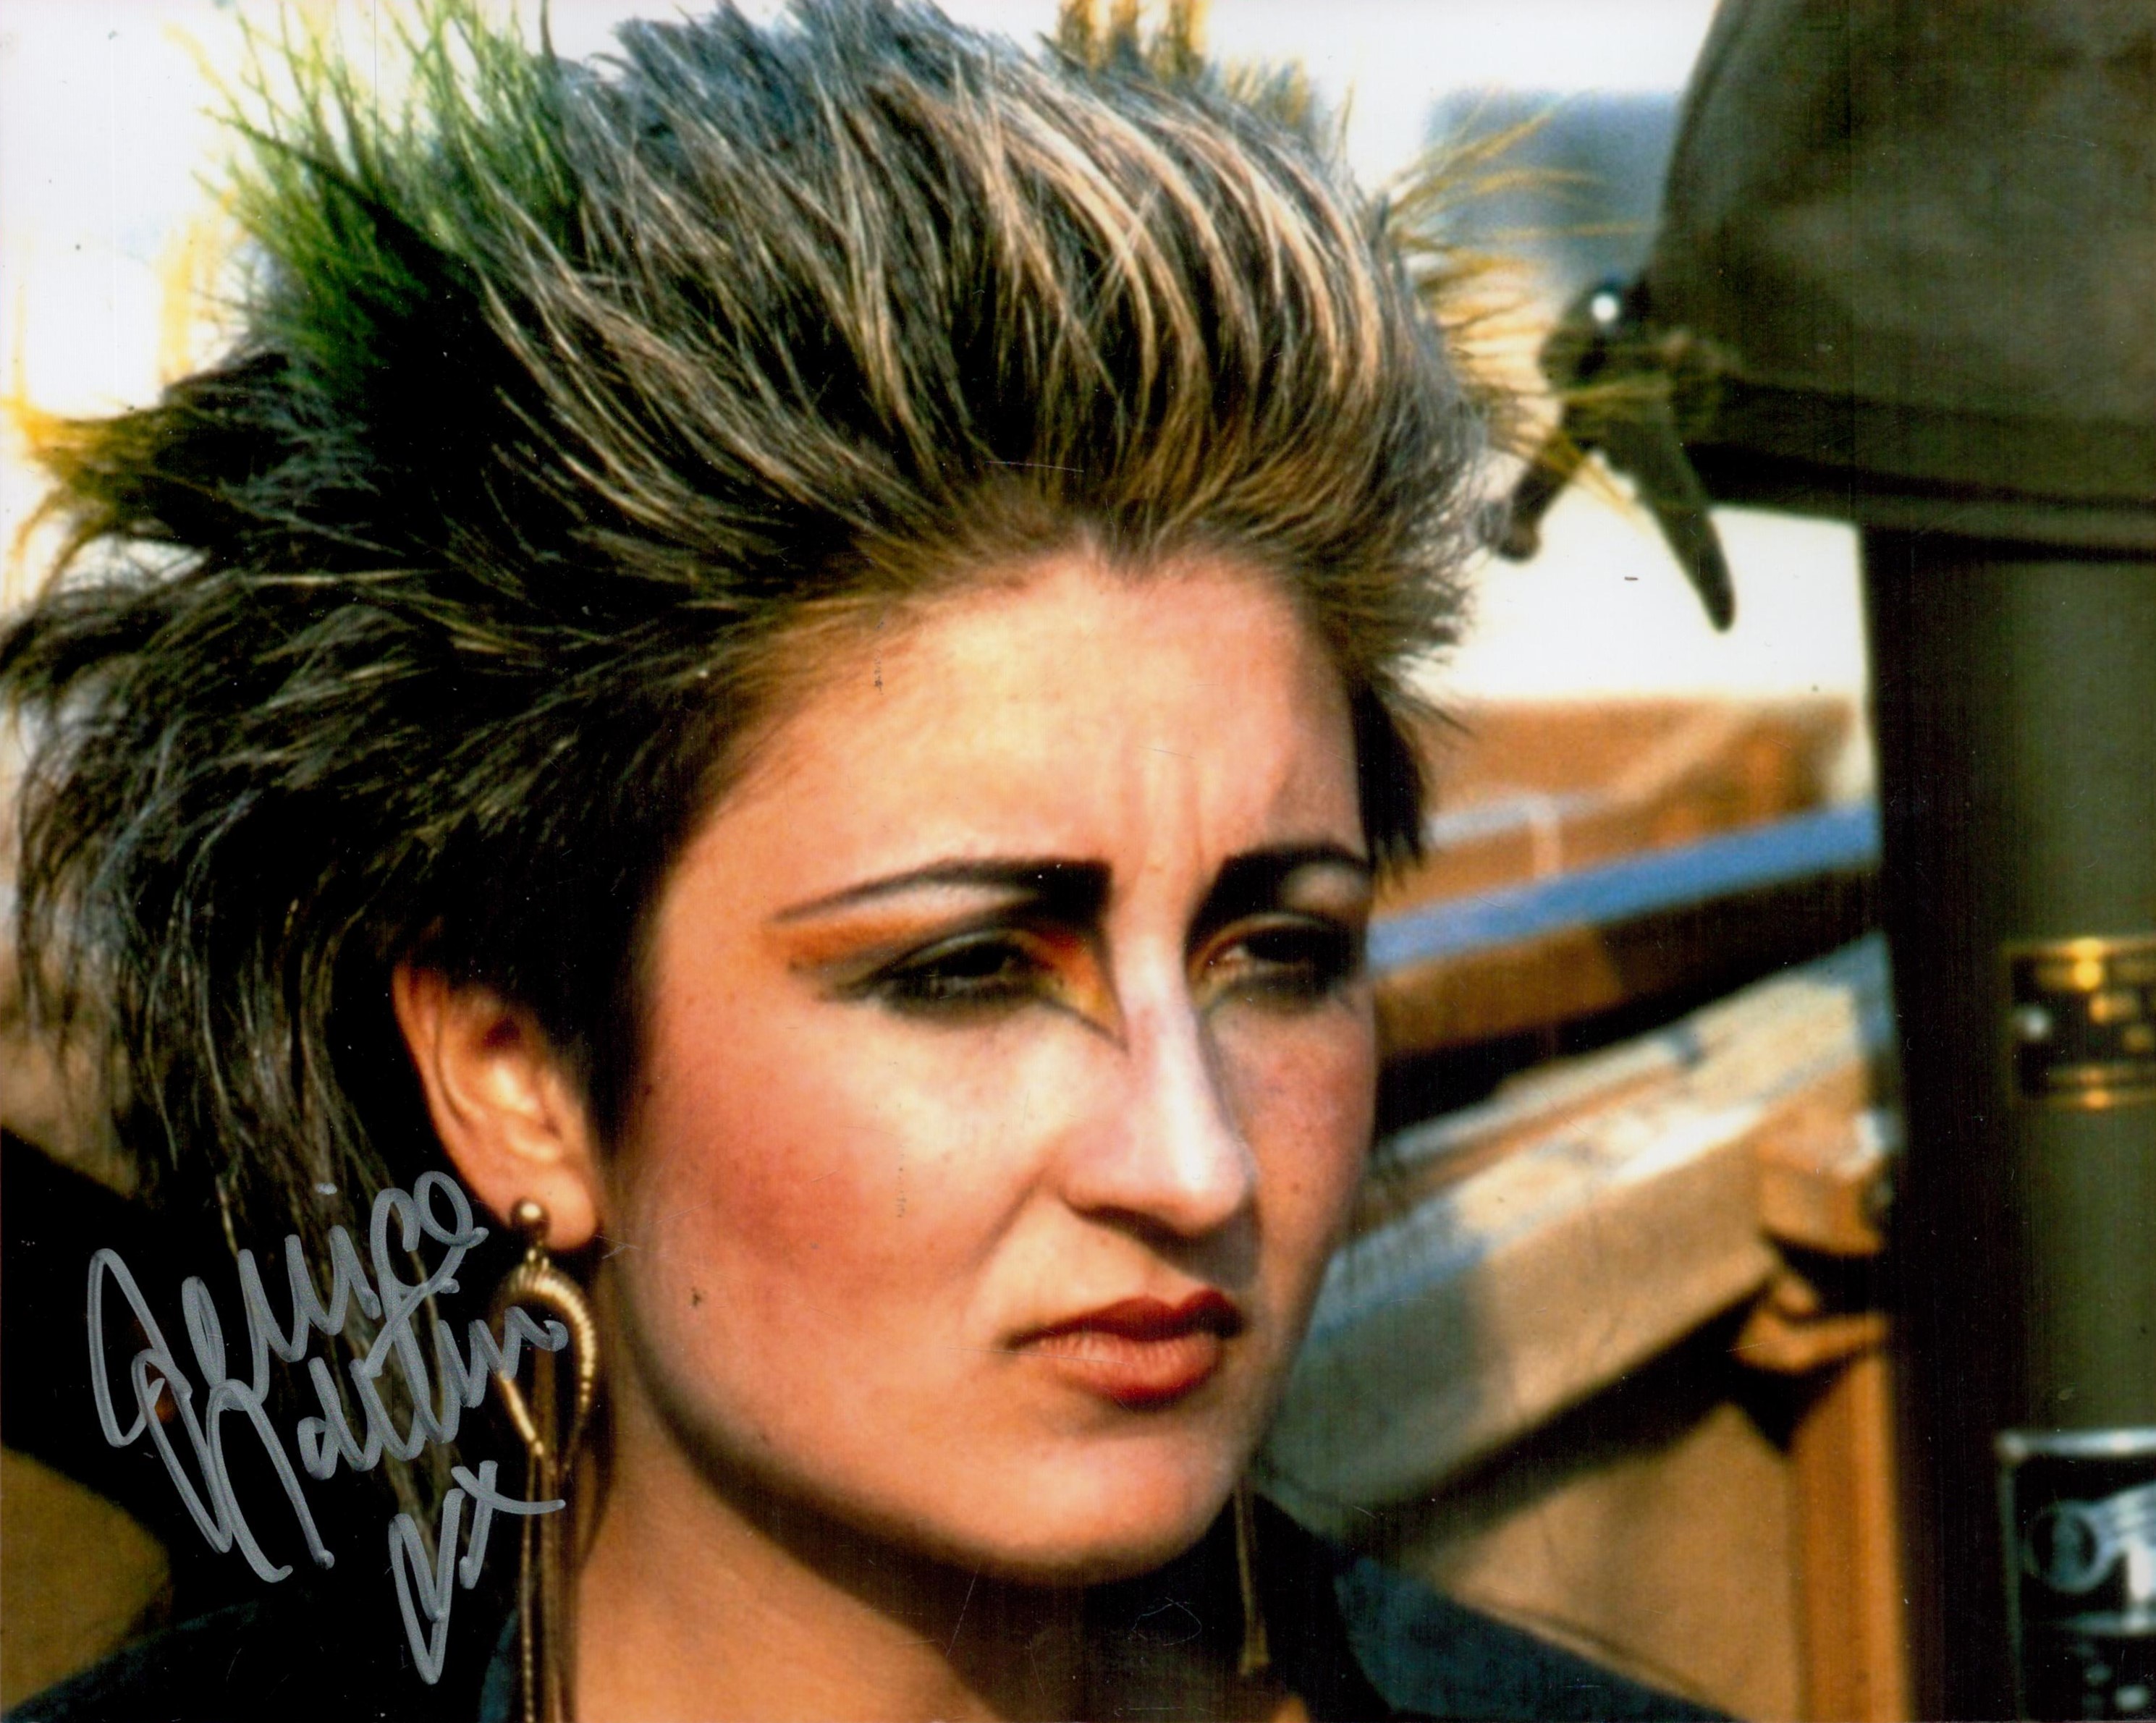 Jessica Martin signed DR Who 10x8 colour photo. All autographs come with a Certificate of